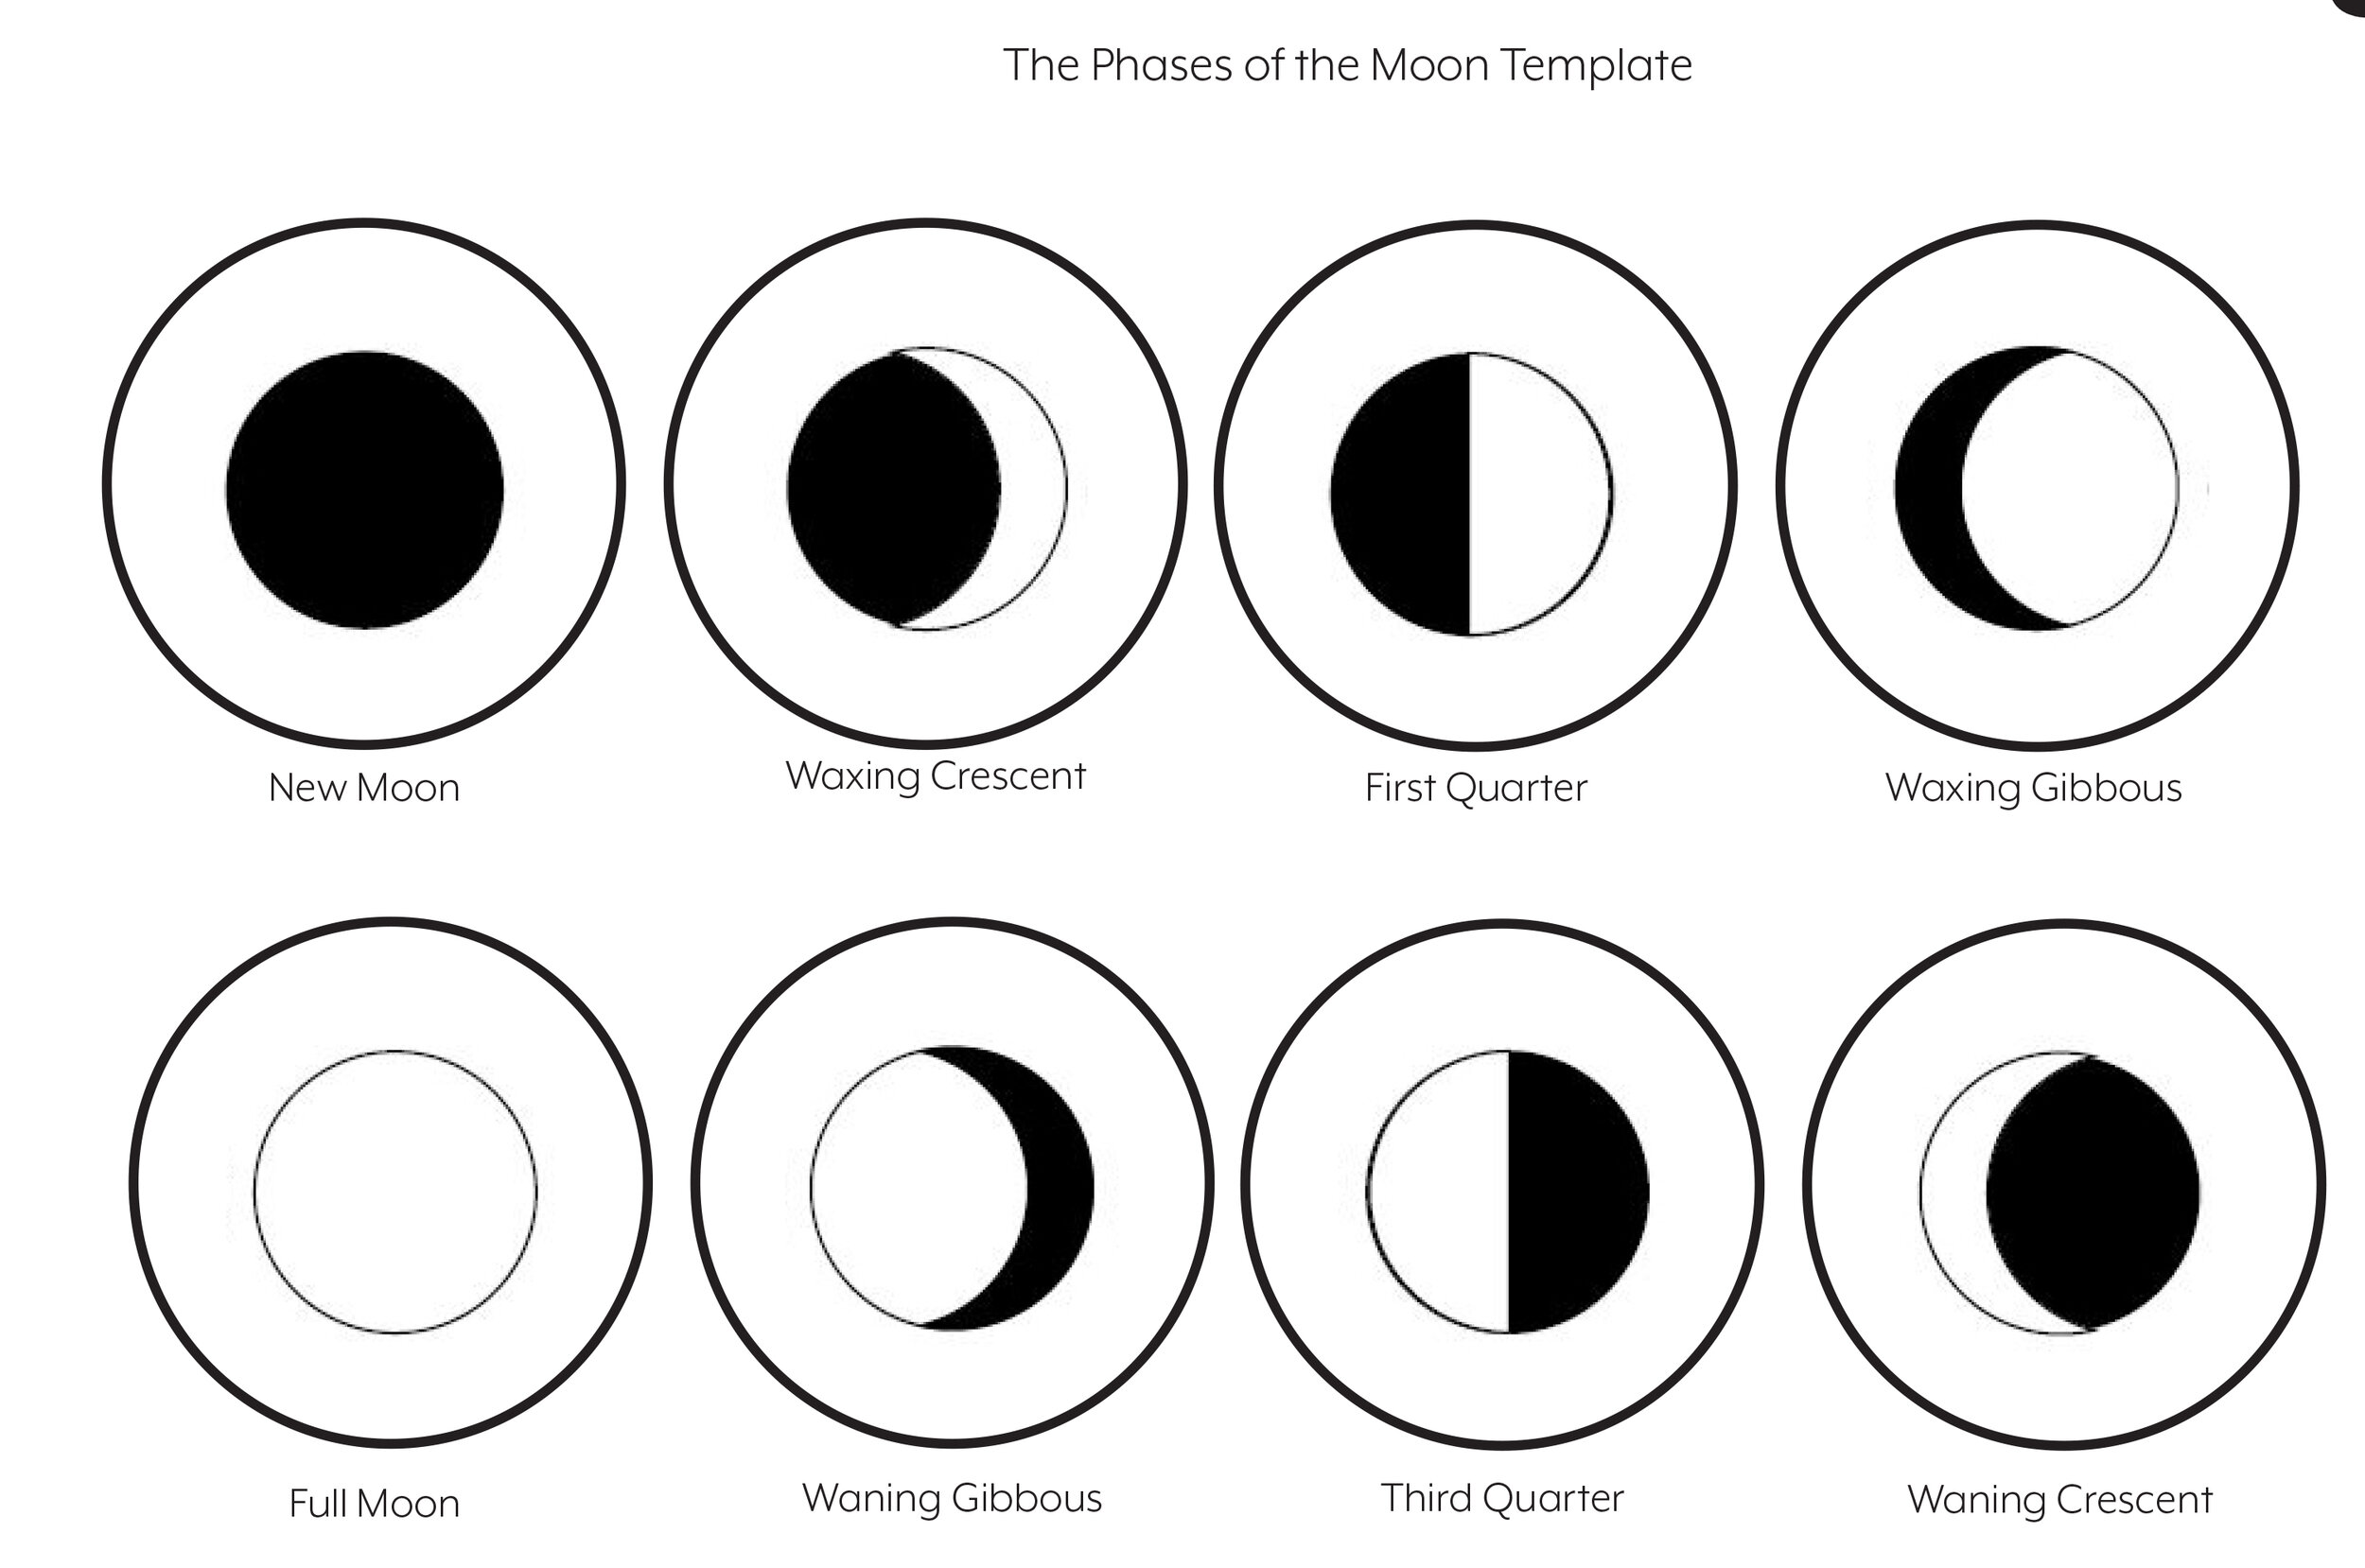 Phases of the moon.jpg